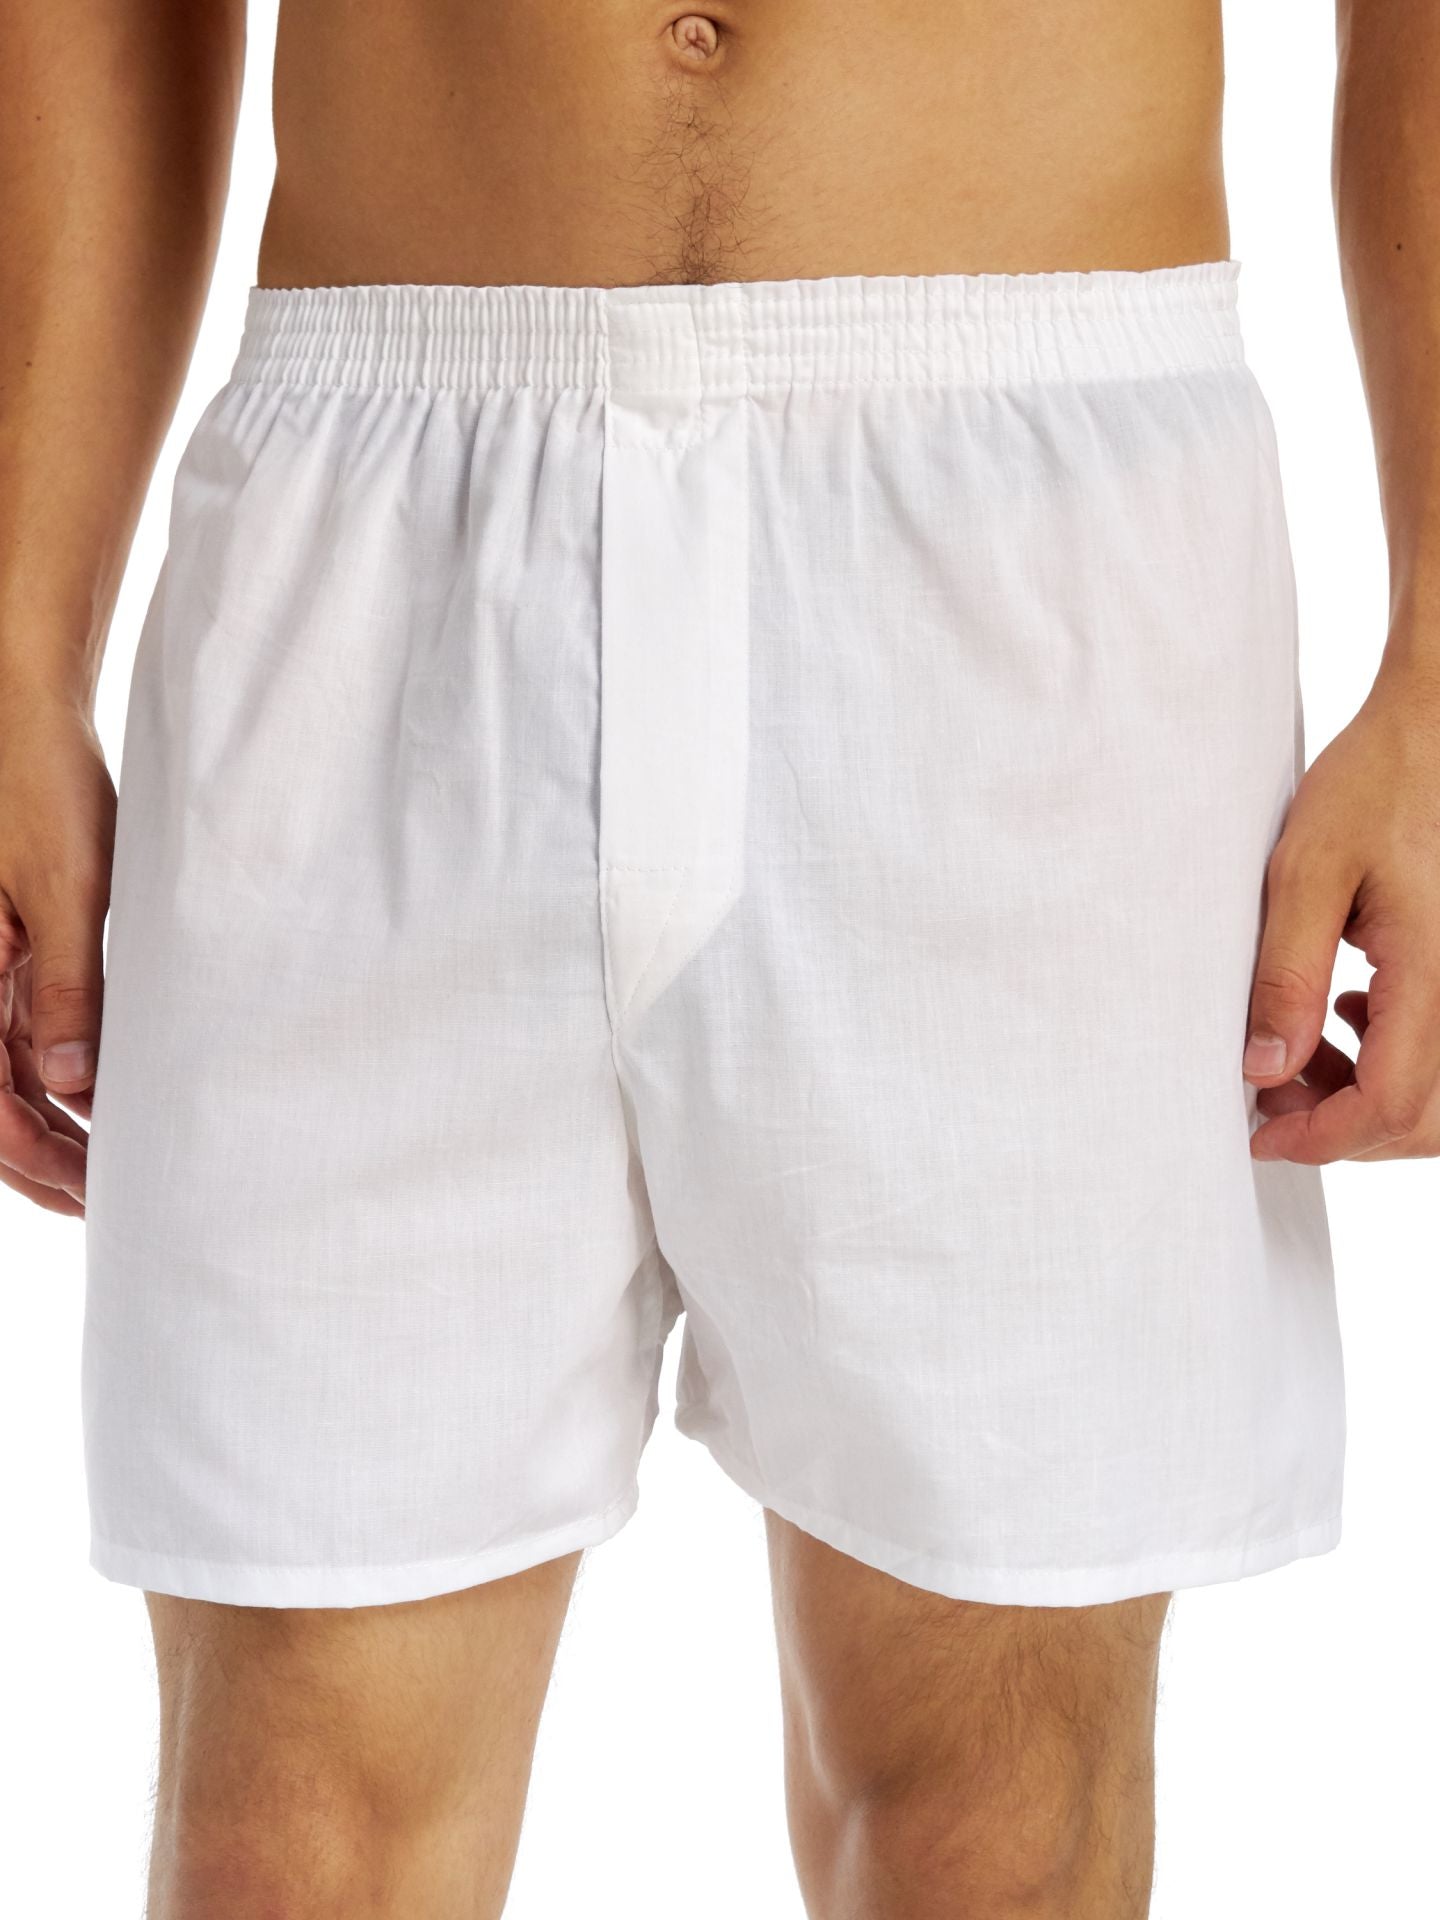 Woven Boxers 5 Pack